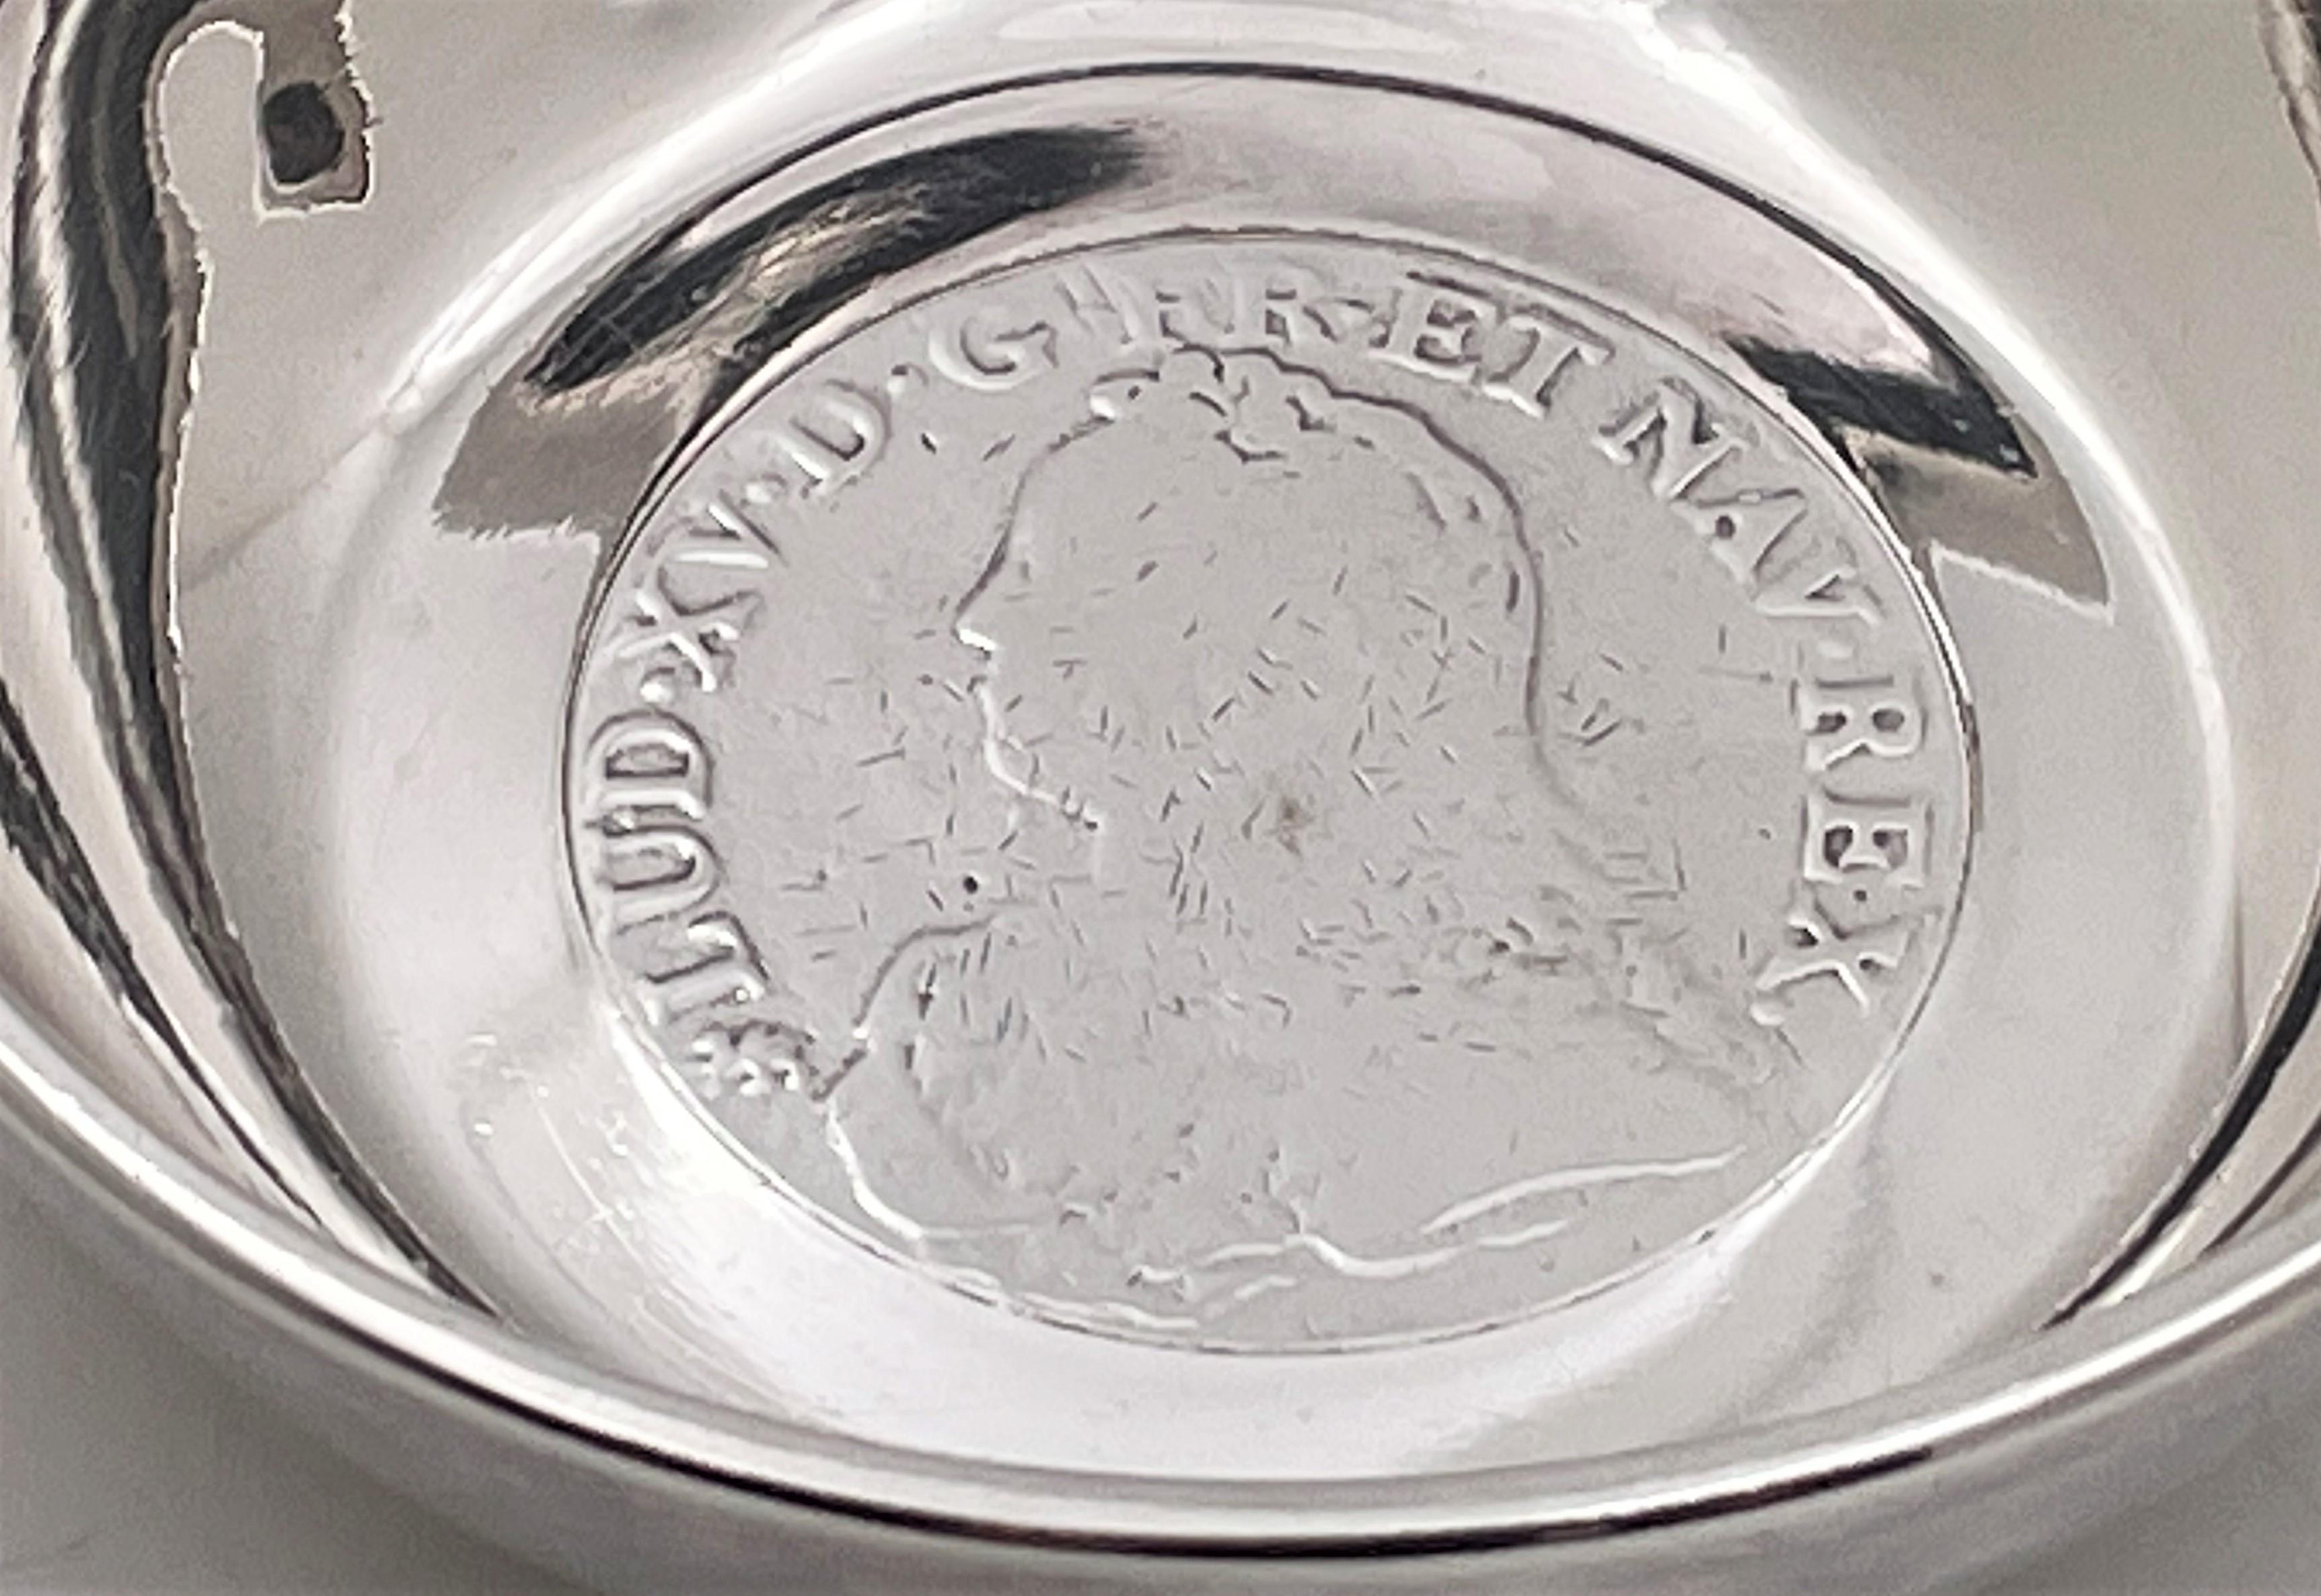 French silver tastevin or wine taster, possibly from the Louis XV era (1732), showcasing a profile view of Louis XV in a coin-like manner at the bottom of the small bowl. On the reverse, there is another motif with the Latin inscription: Benedictum